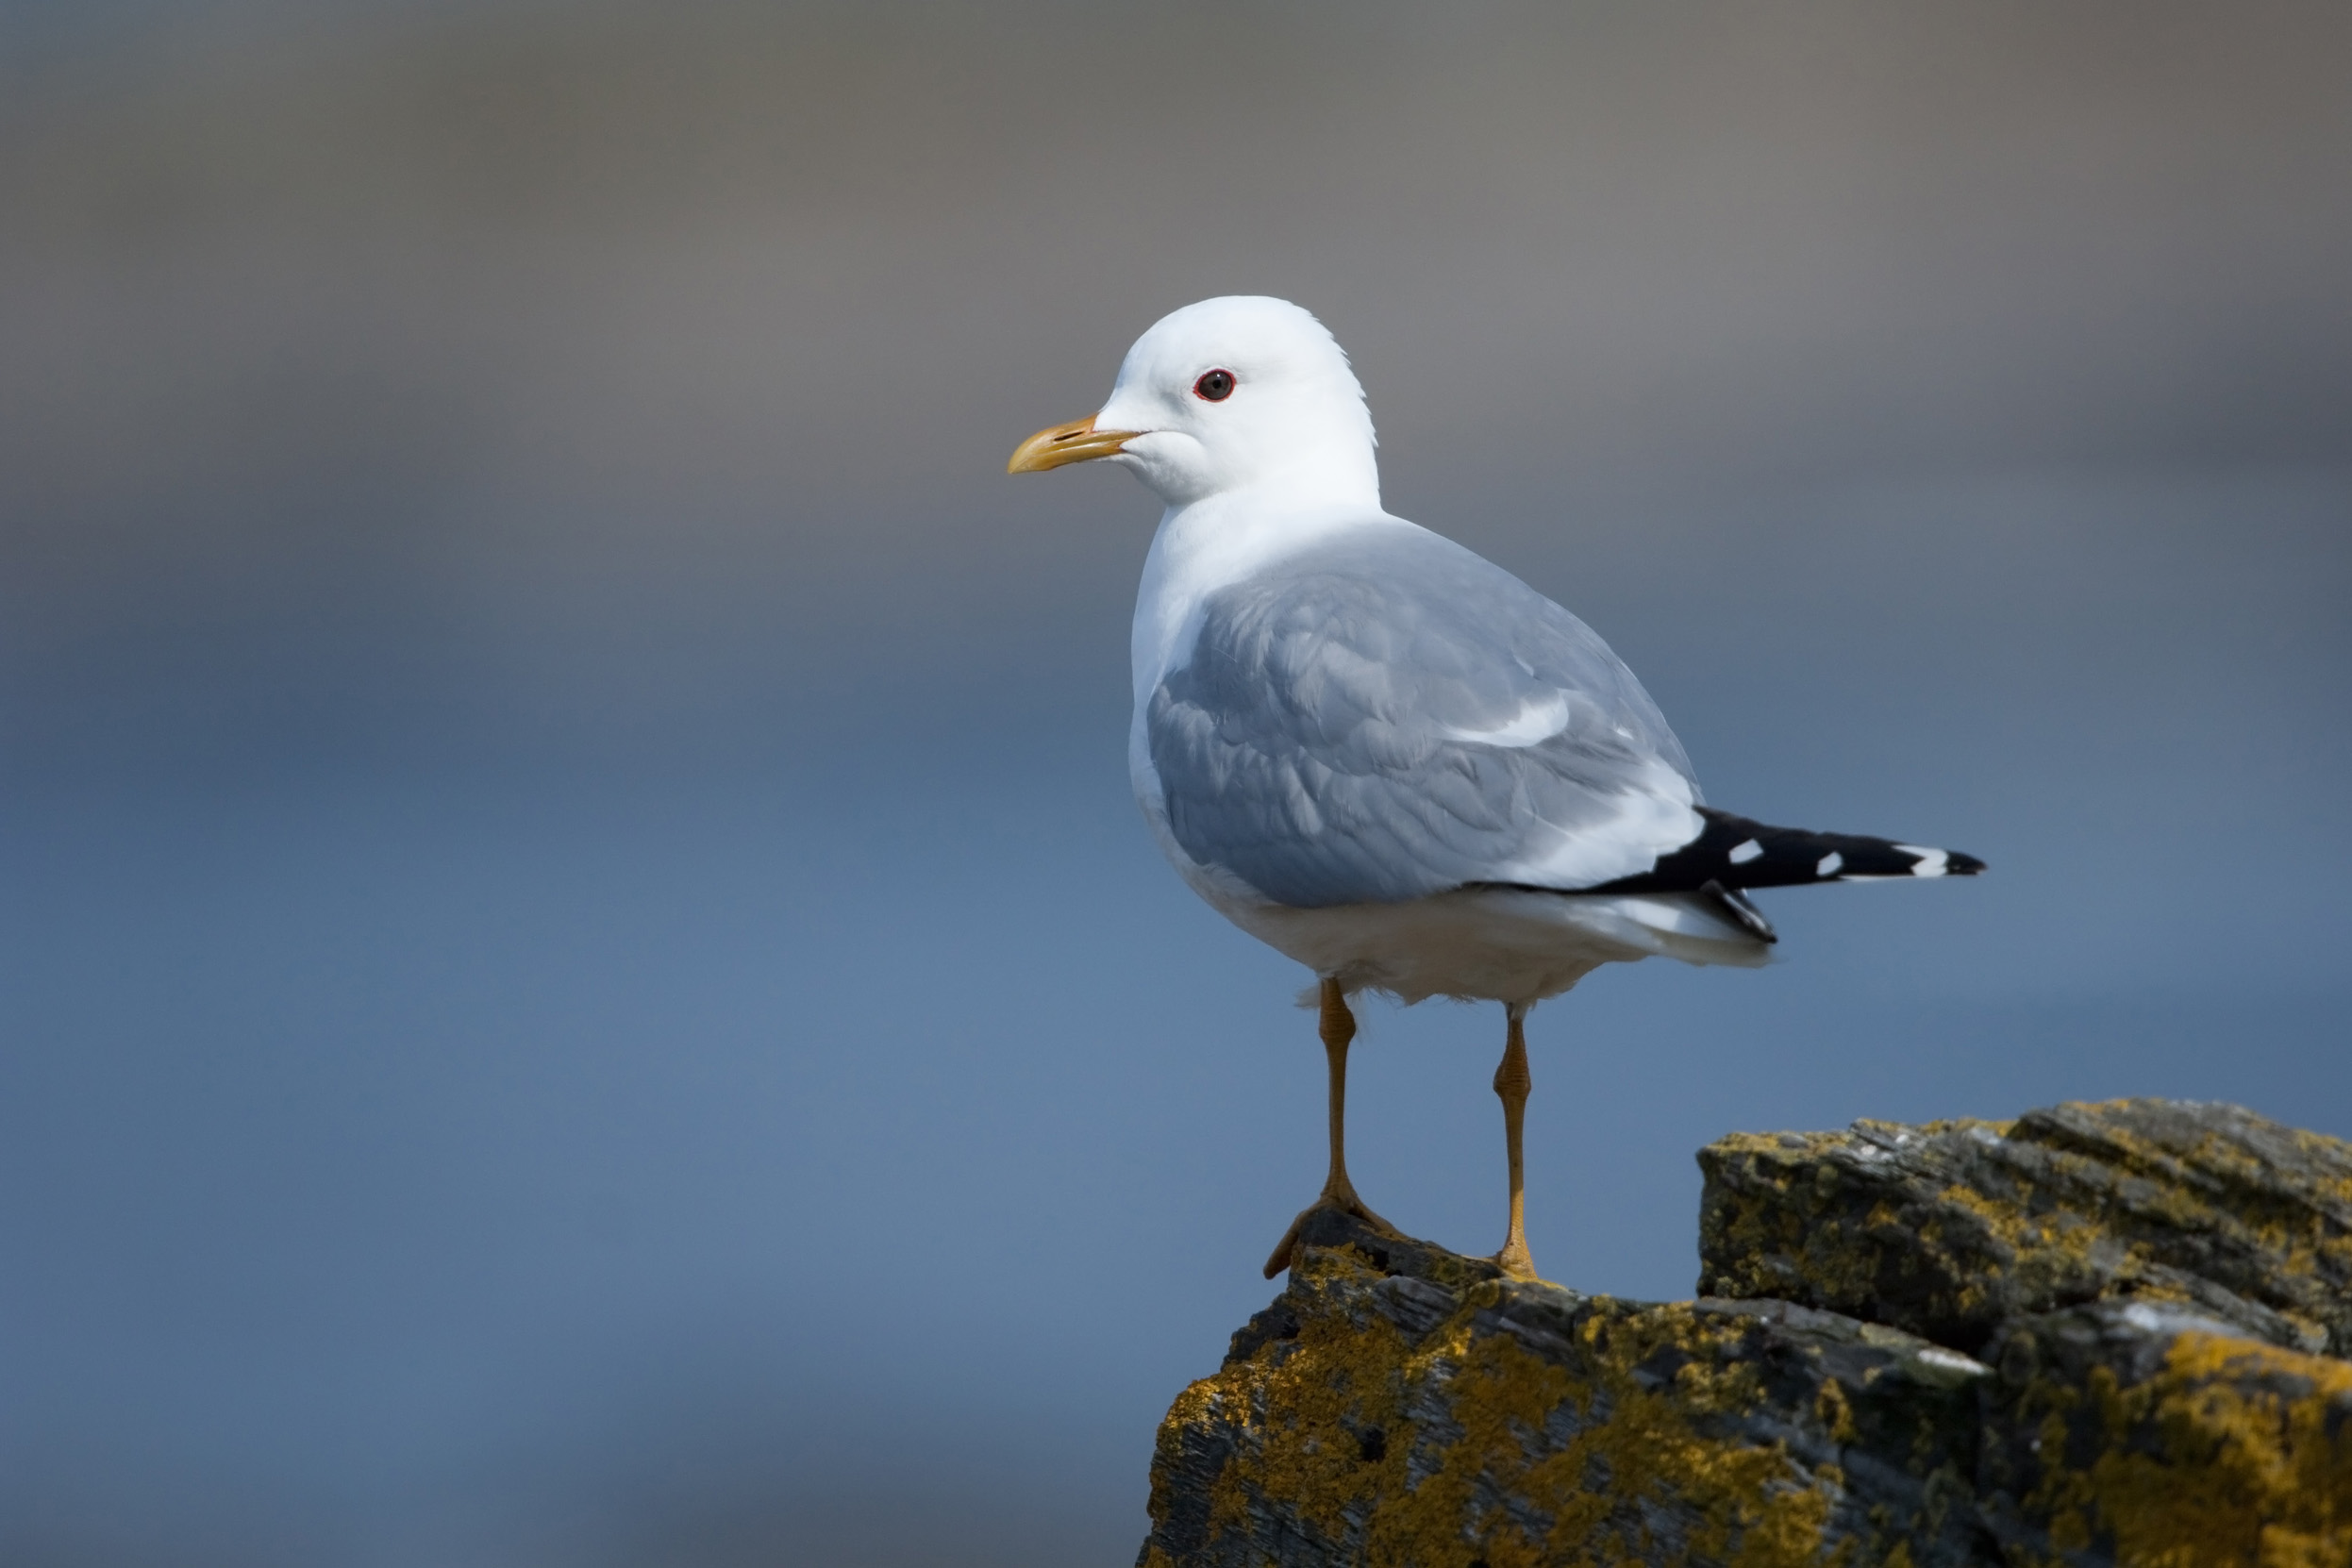 A lone Common Gull in summer plumage stood on the edge of a rock overlooking the sea.